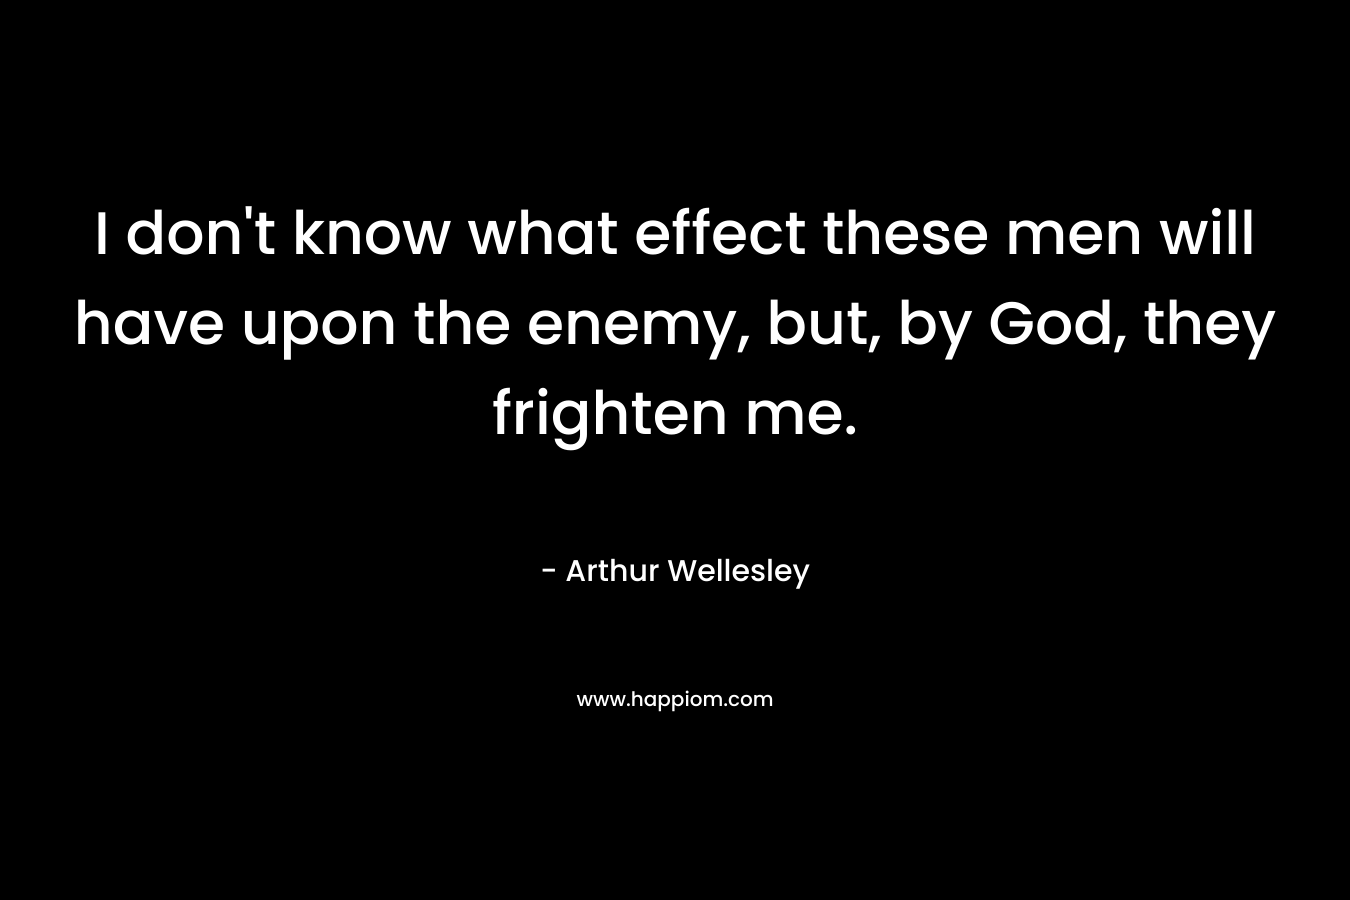 I don’t know what effect these men will have upon the enemy, but, by God, they frighten me. – Arthur Wellesley